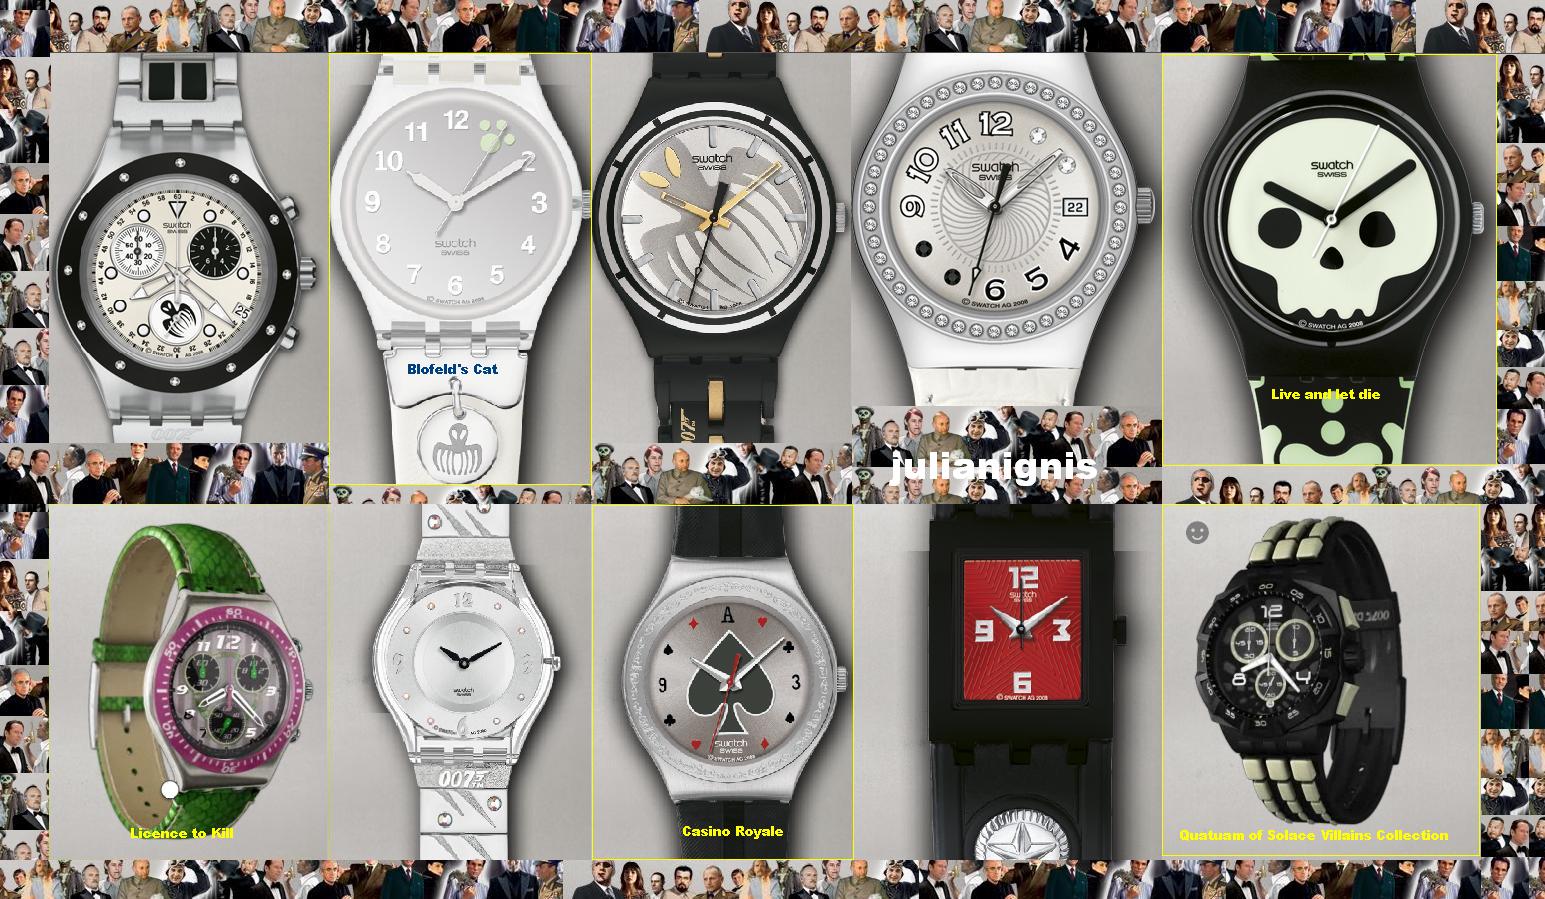 swatch 007 villain collection